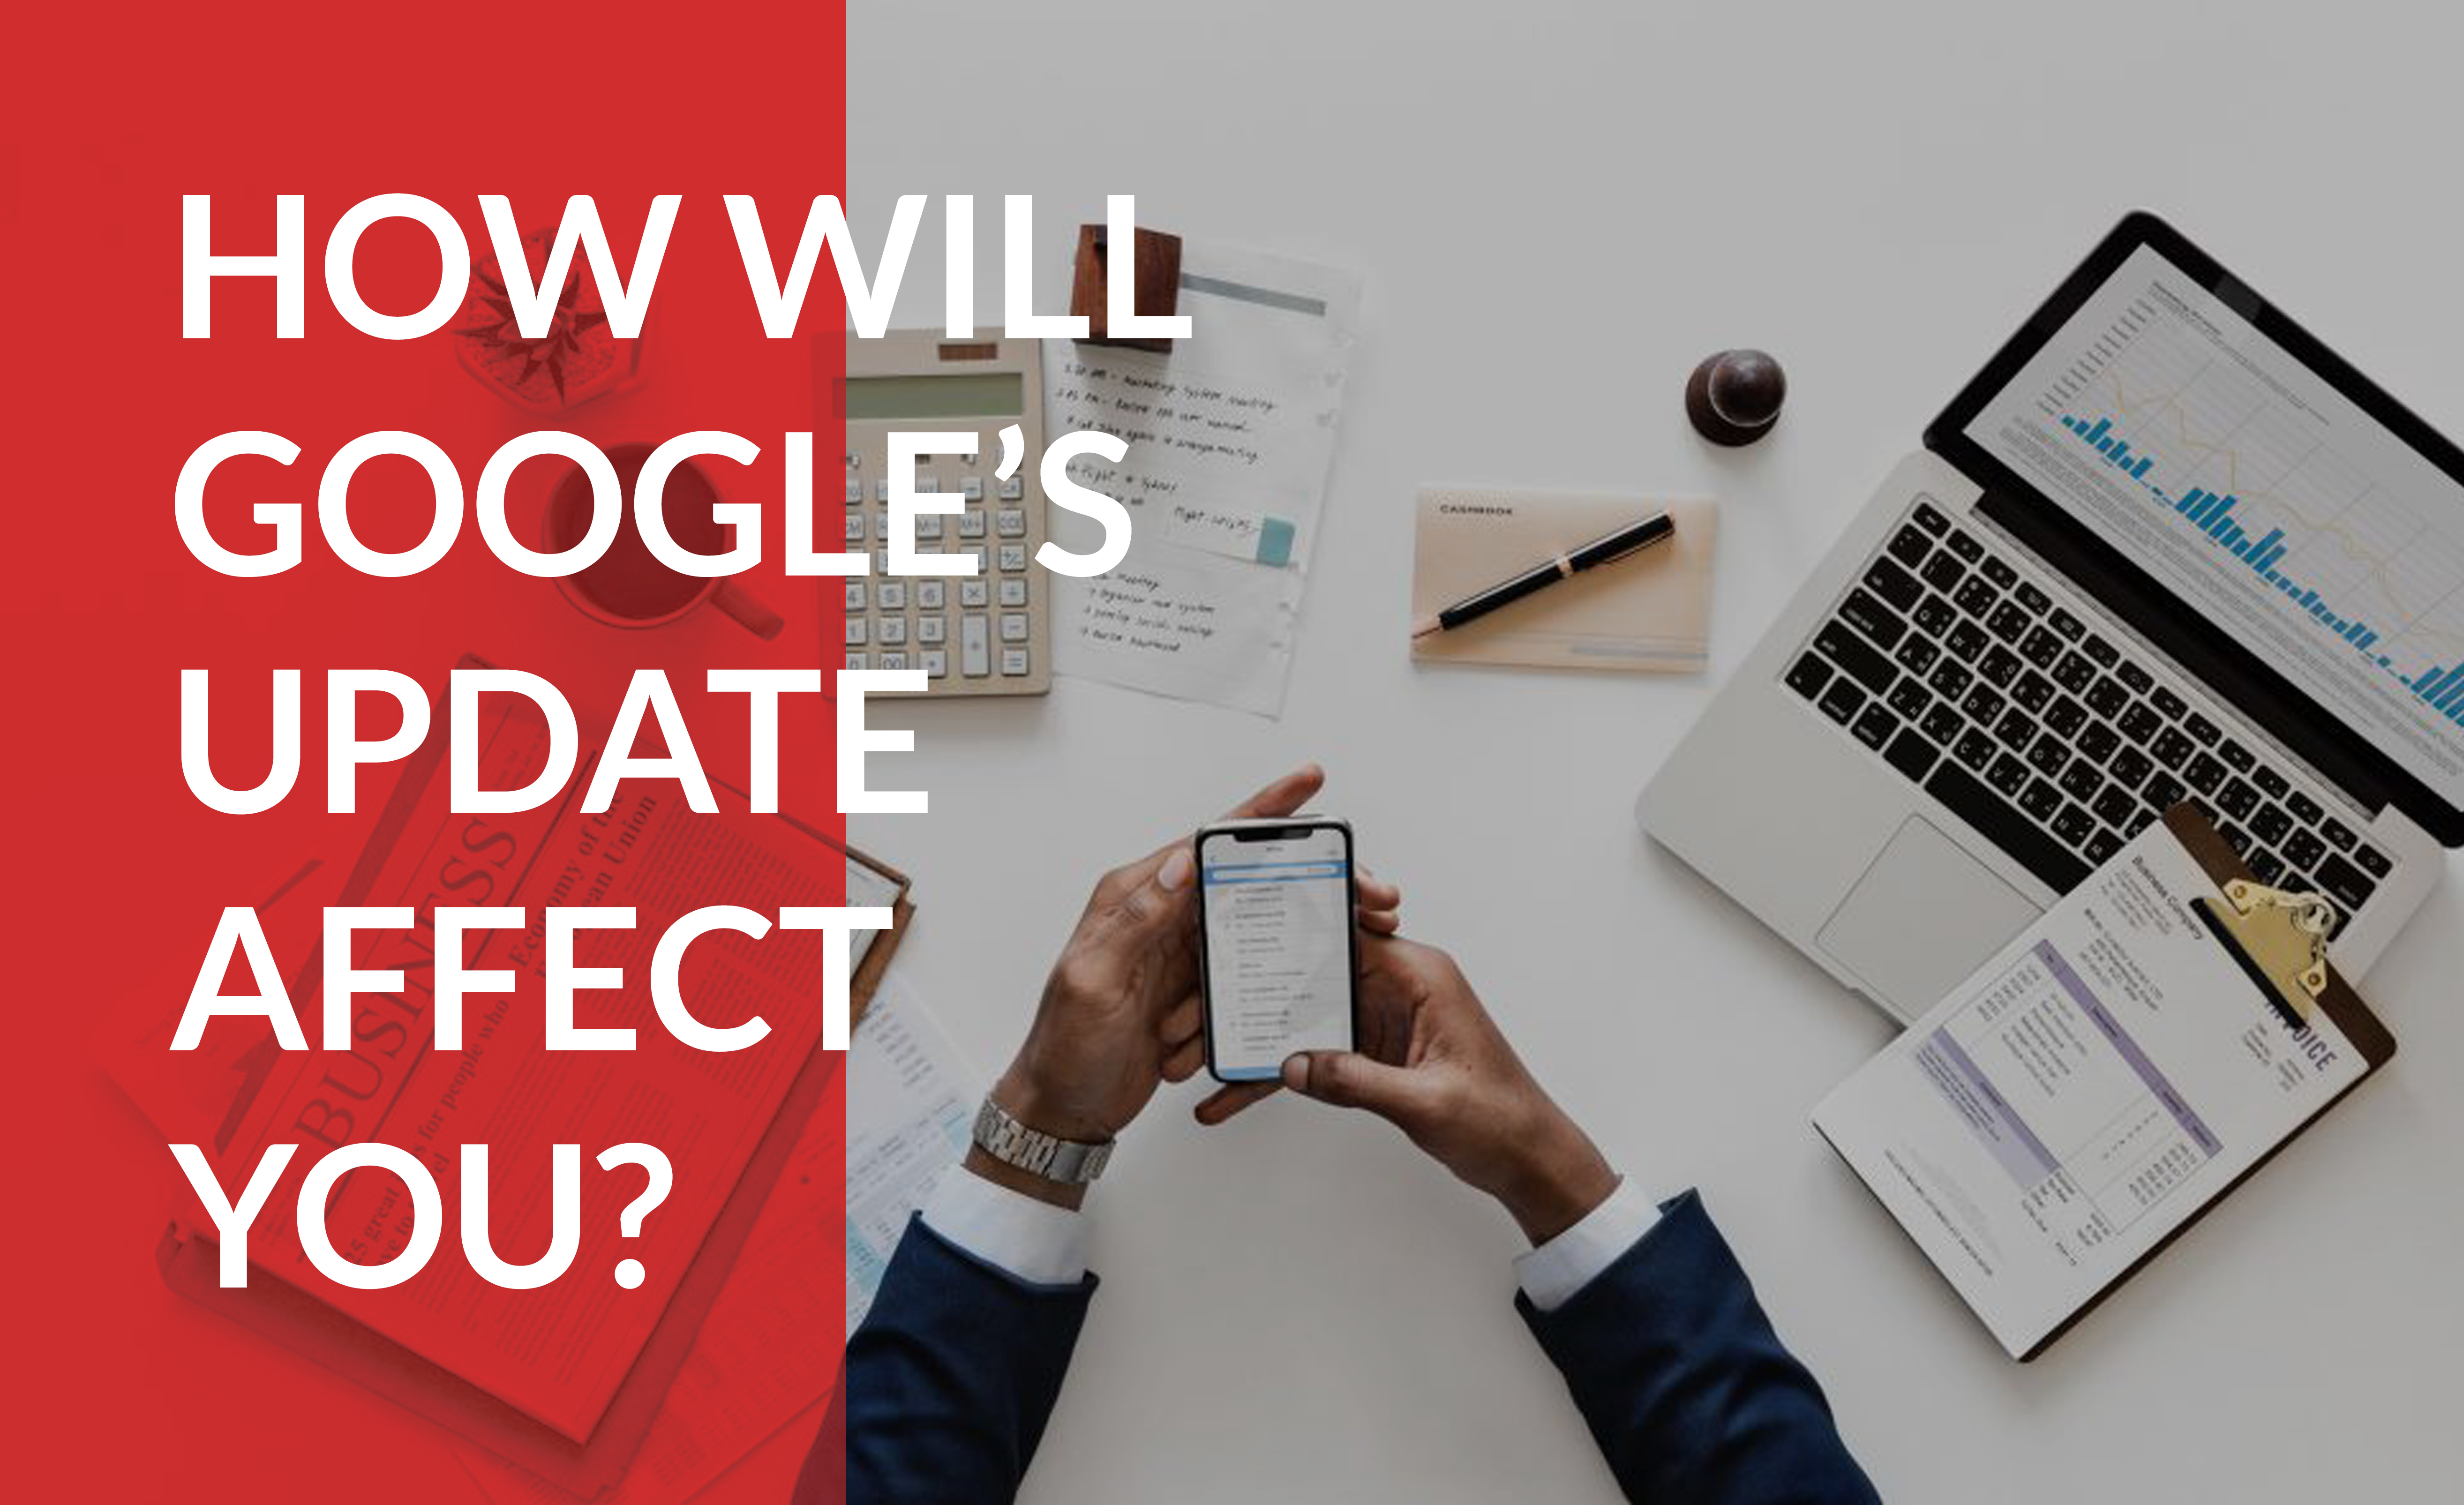 Learn how Google's new changes will change your business website.